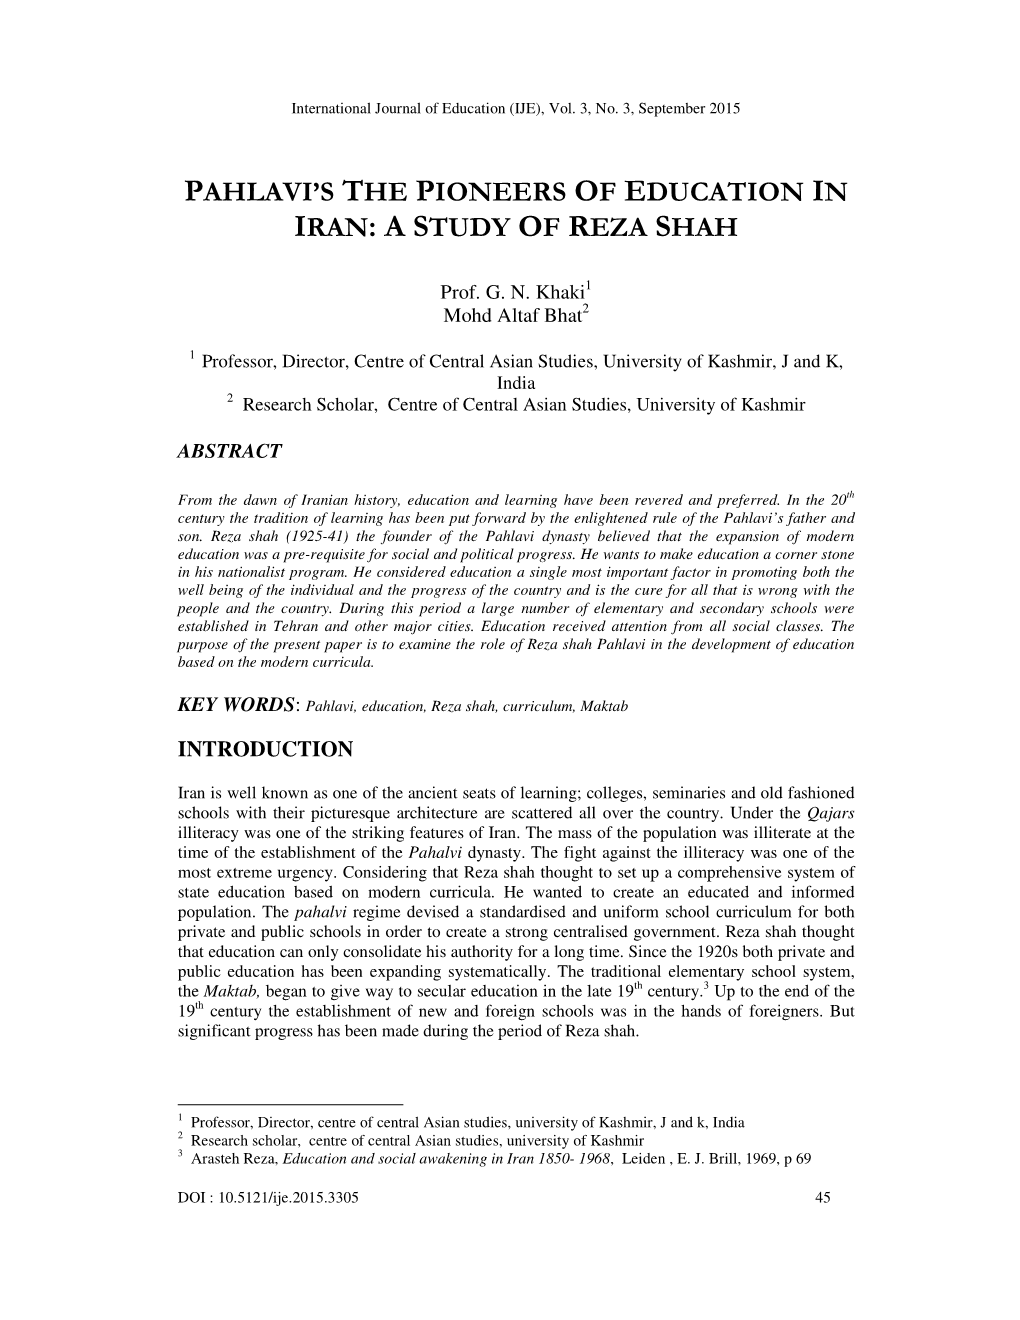 Pahlavi's the Pioneers of Education in Iran: a Study of Reza Shah